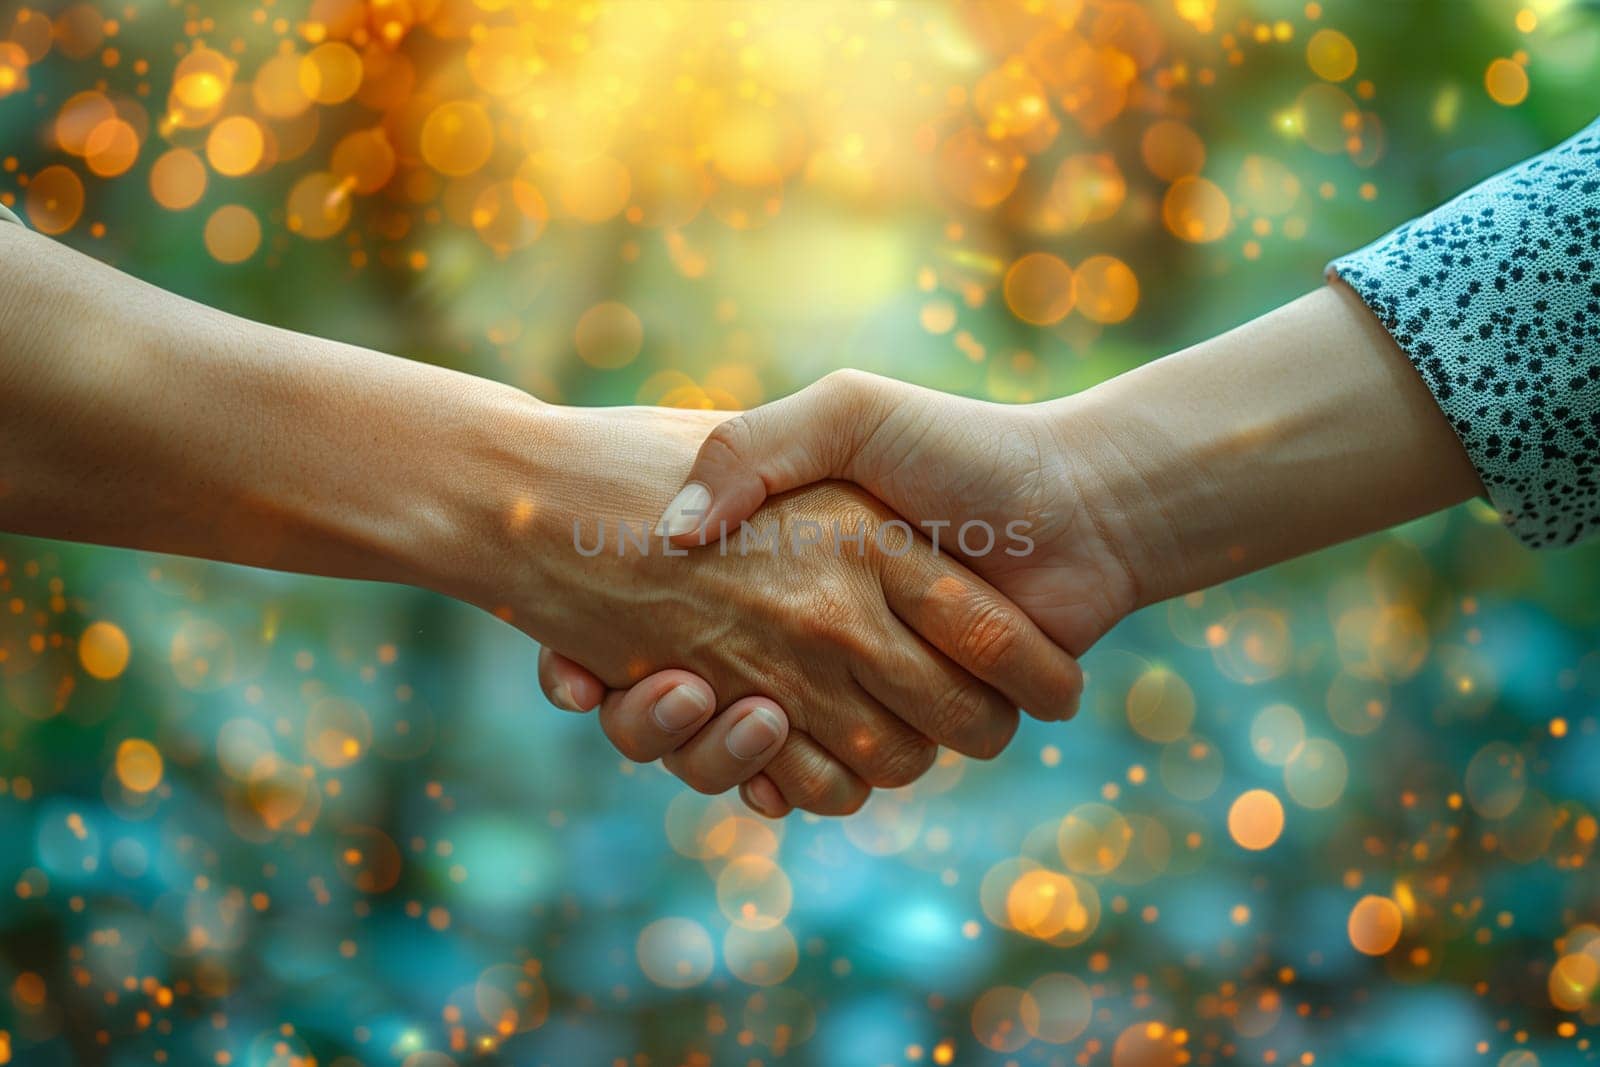 Two People Shaking Hands Over Blurry Background by Sd28DimoN_1976